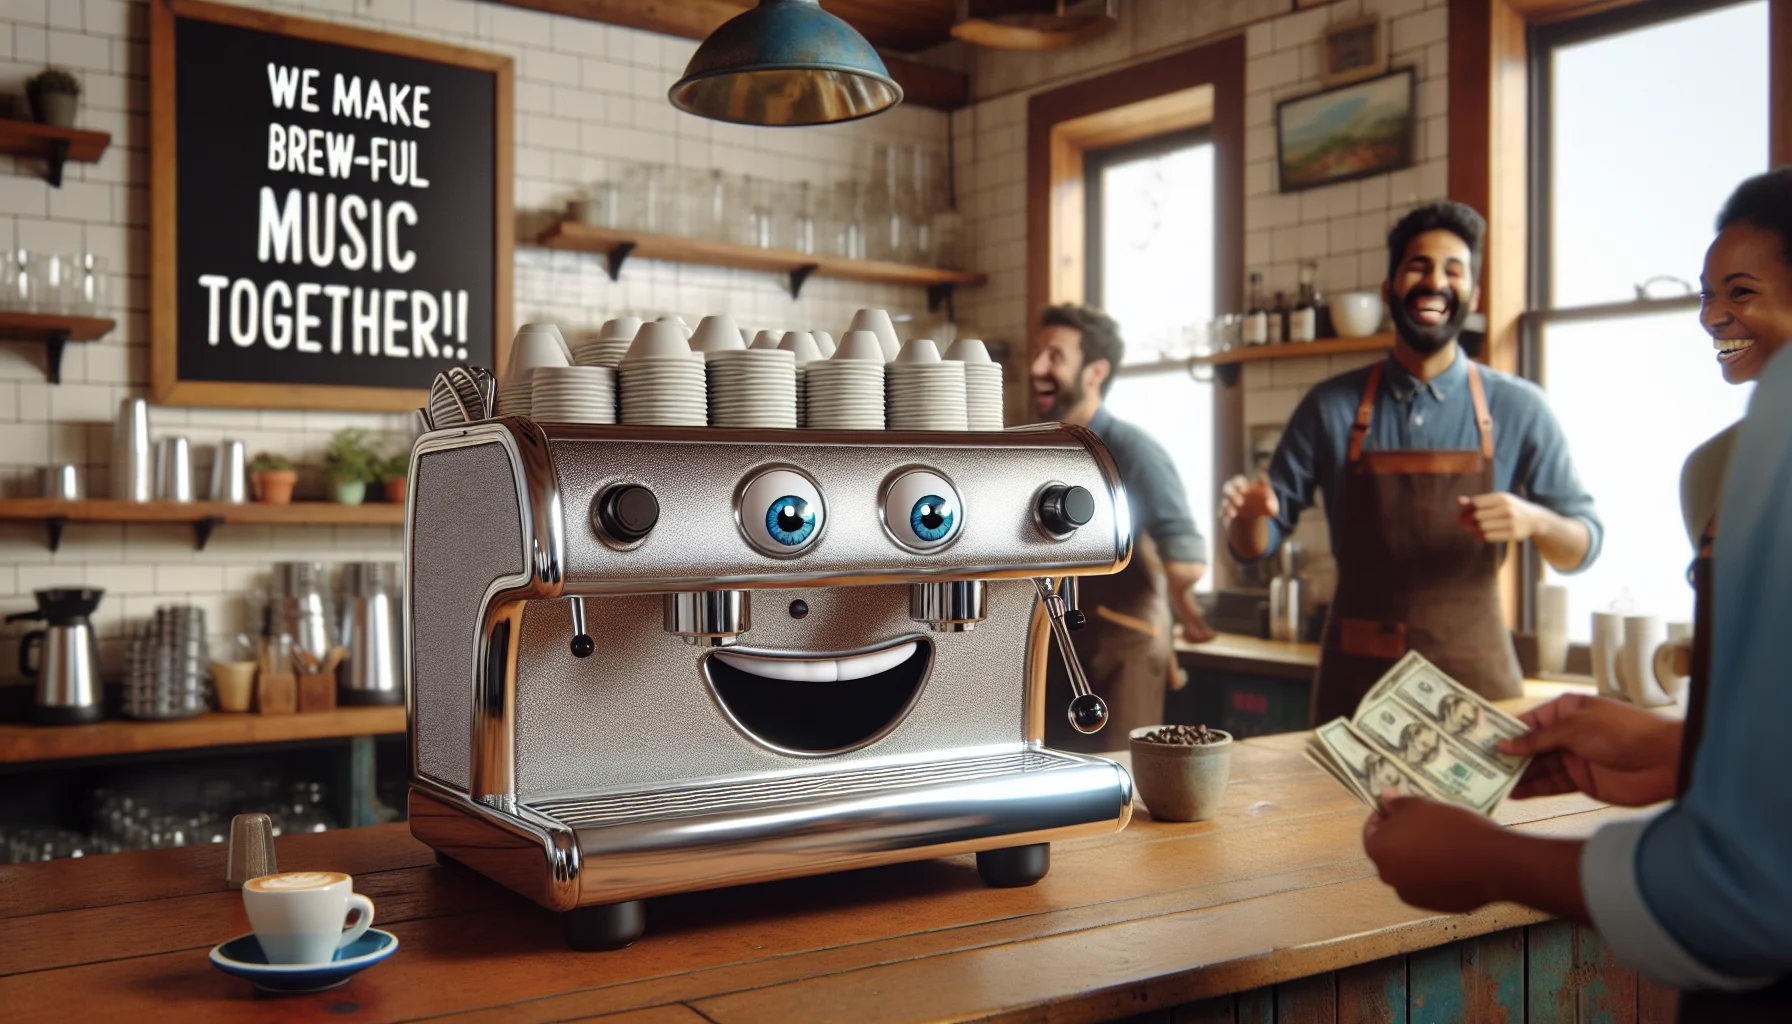 Imagine a humorous scenario, where a shiny, silver espresso machine is the center of attention. The machine is not just enticing but has cartoonish eyes and a wide grin painted on it. It's sitting on a well-polished wooden counter of a cozy café. There is a sign hanging above it saying, 'We make brew-tiful music together!' In the background, barista with South Asian descent and male gender is chuckling, an apron wrapped around his waist, while a customer, a black female, also laughs while handing over cash for her espresso. The atmosphere in the café is one of relaxed joy and anticipation for the delicious coffee.